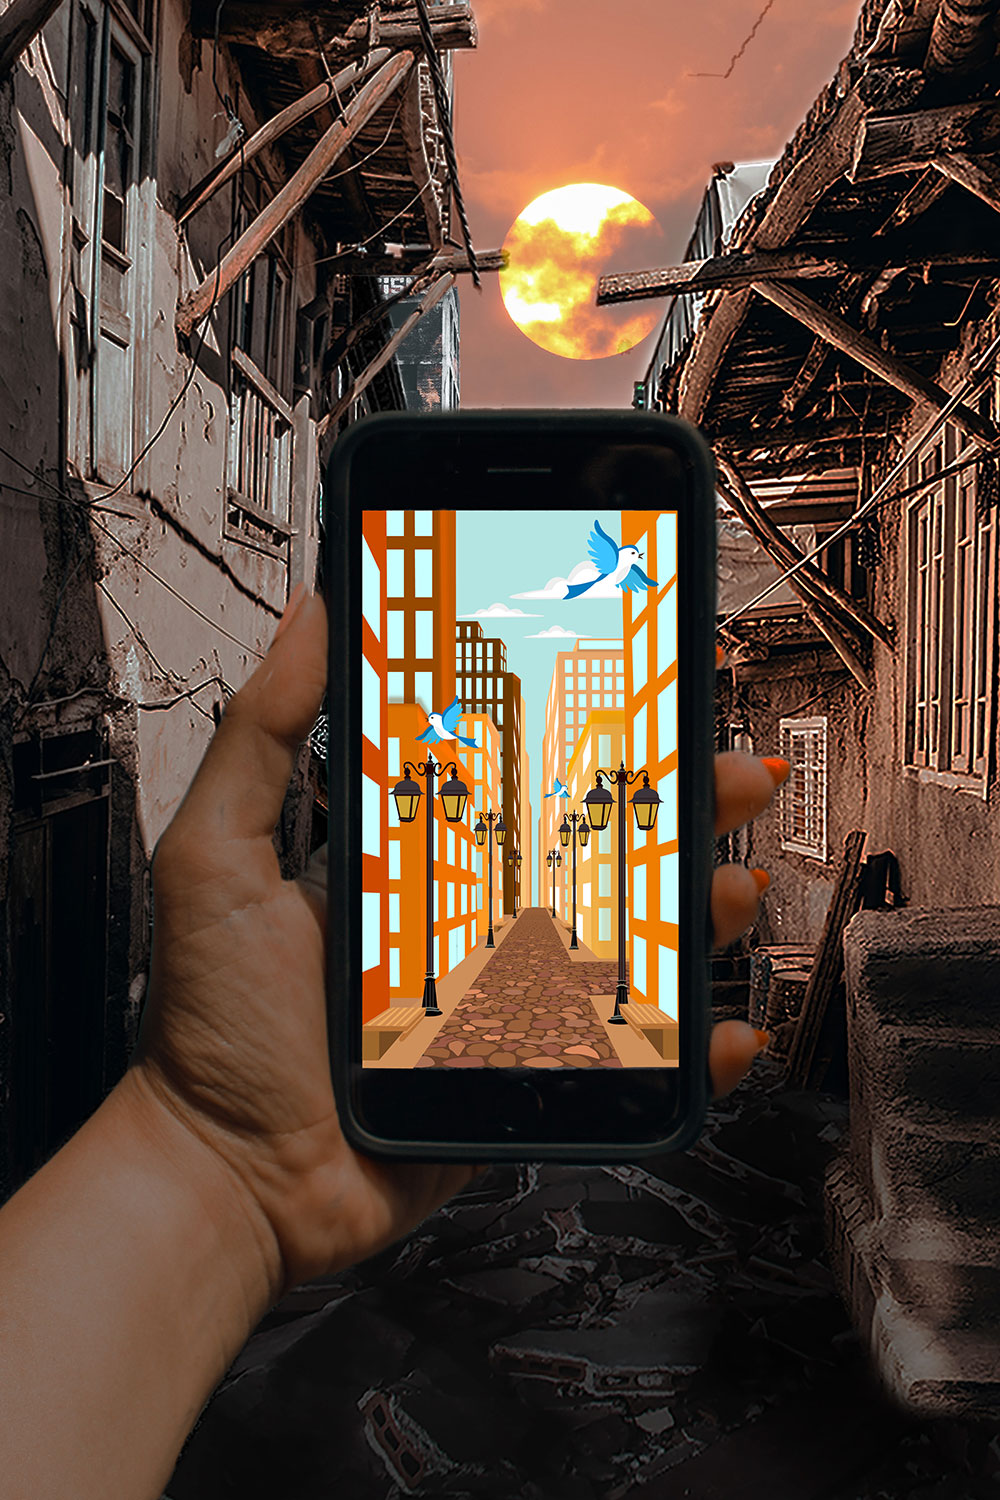 A photoshopped and illustrated image composed of a rundown city on the outer edges of the composition, with a phone held up in the middle depicting a more colorful vibrant version of the city. With skyscrapers, bricked roads, and blue birds flying around. 